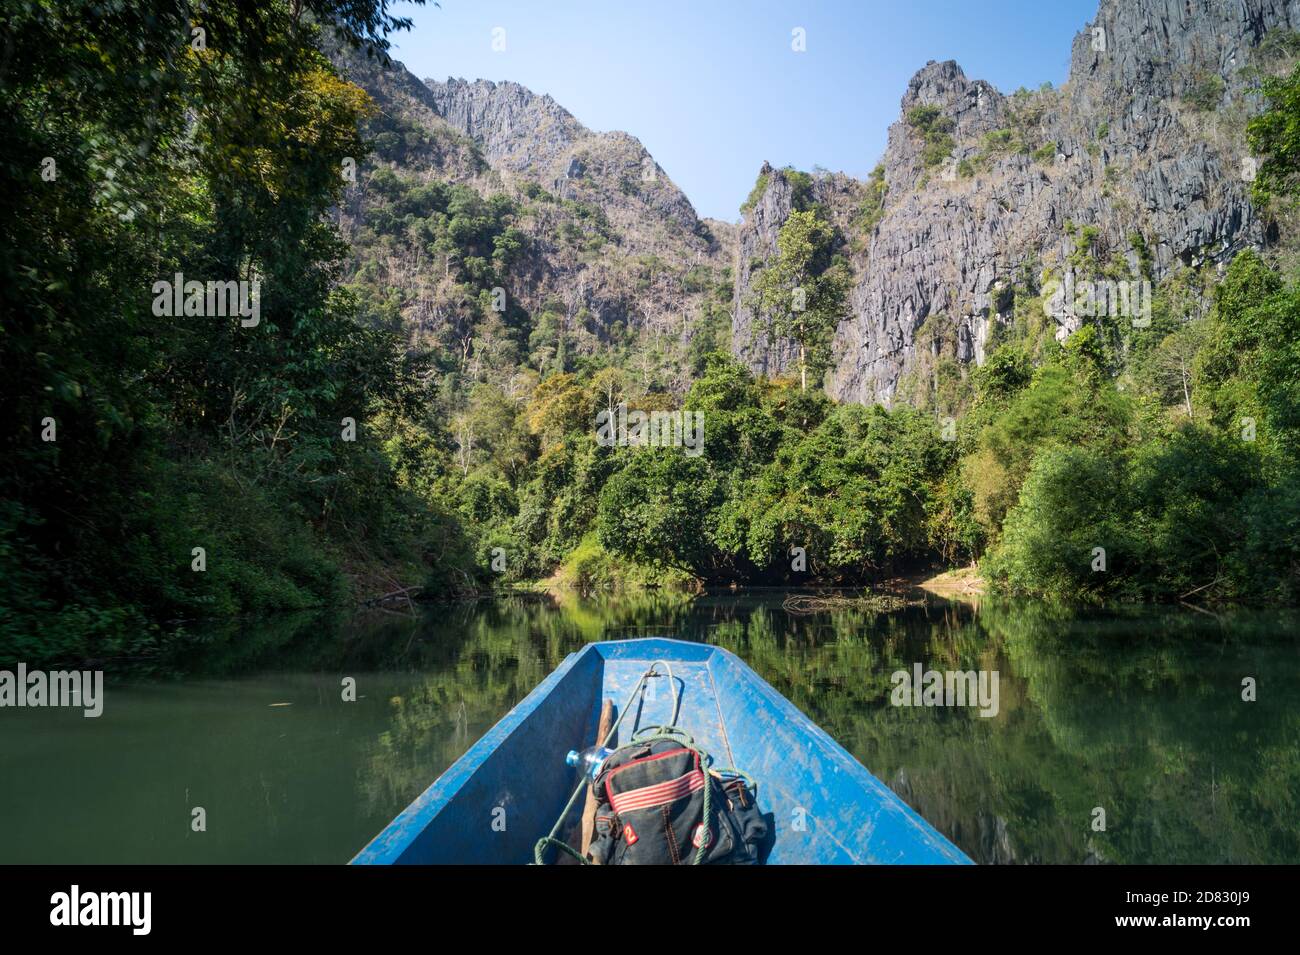 Boat on a river with mountains Stock Photo